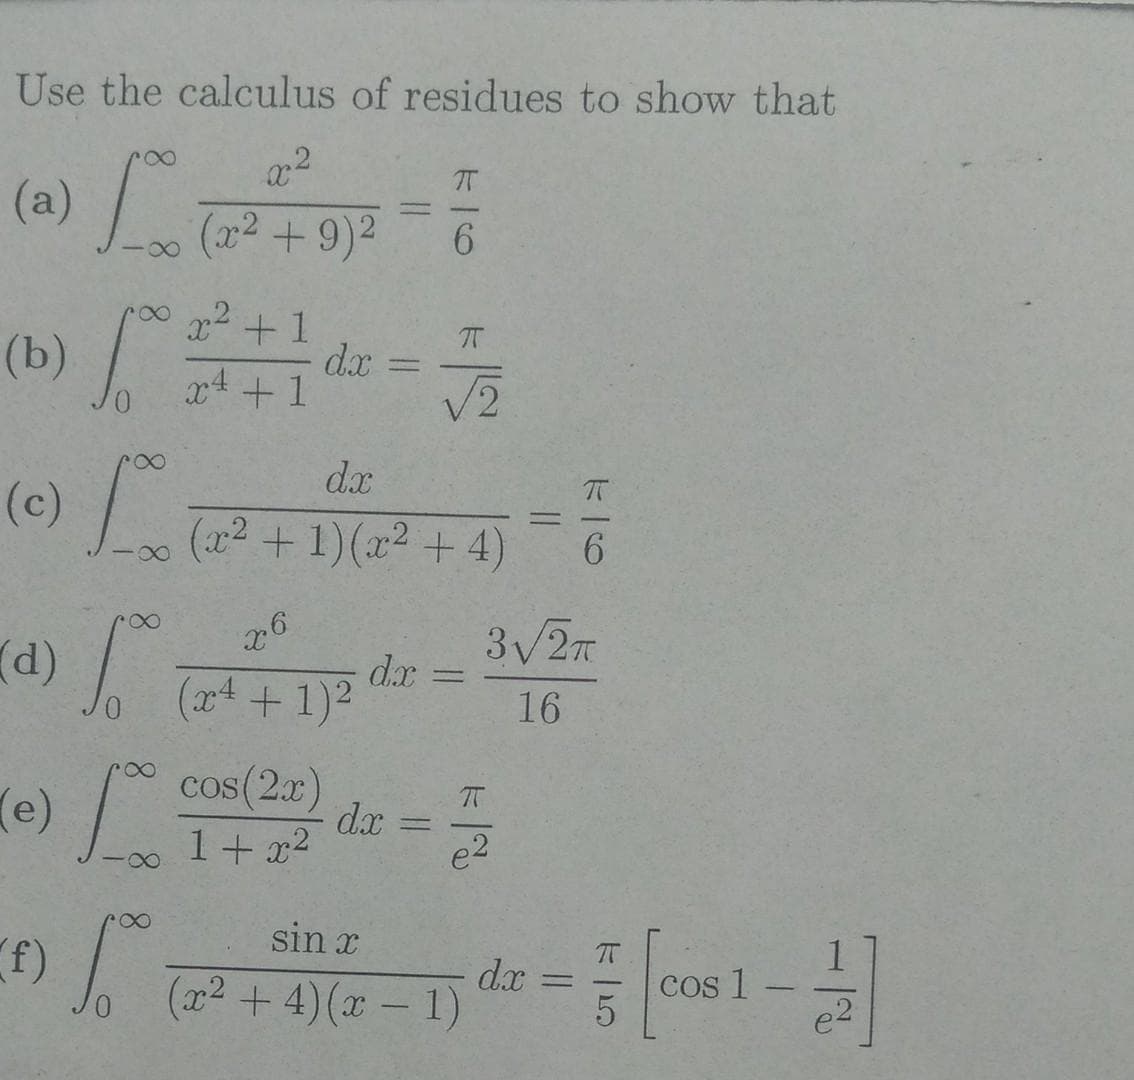 (a) -0
Use the calculus of residues to show that
IT
(a)
-
(x2 +9)2
6.
x +1
dx
x4 +1
(b)/
(e)
%3D
V2
d.x
(x2 +1)(x2 + 4)
6.
3/2
d.r =
16
(x4 +1)2
(e)/ Cos(2)
dx
1+ x2
%3D
e2
sin x
T
dx
(x2 + 4) (x - 1)
Cos 1
|
|
